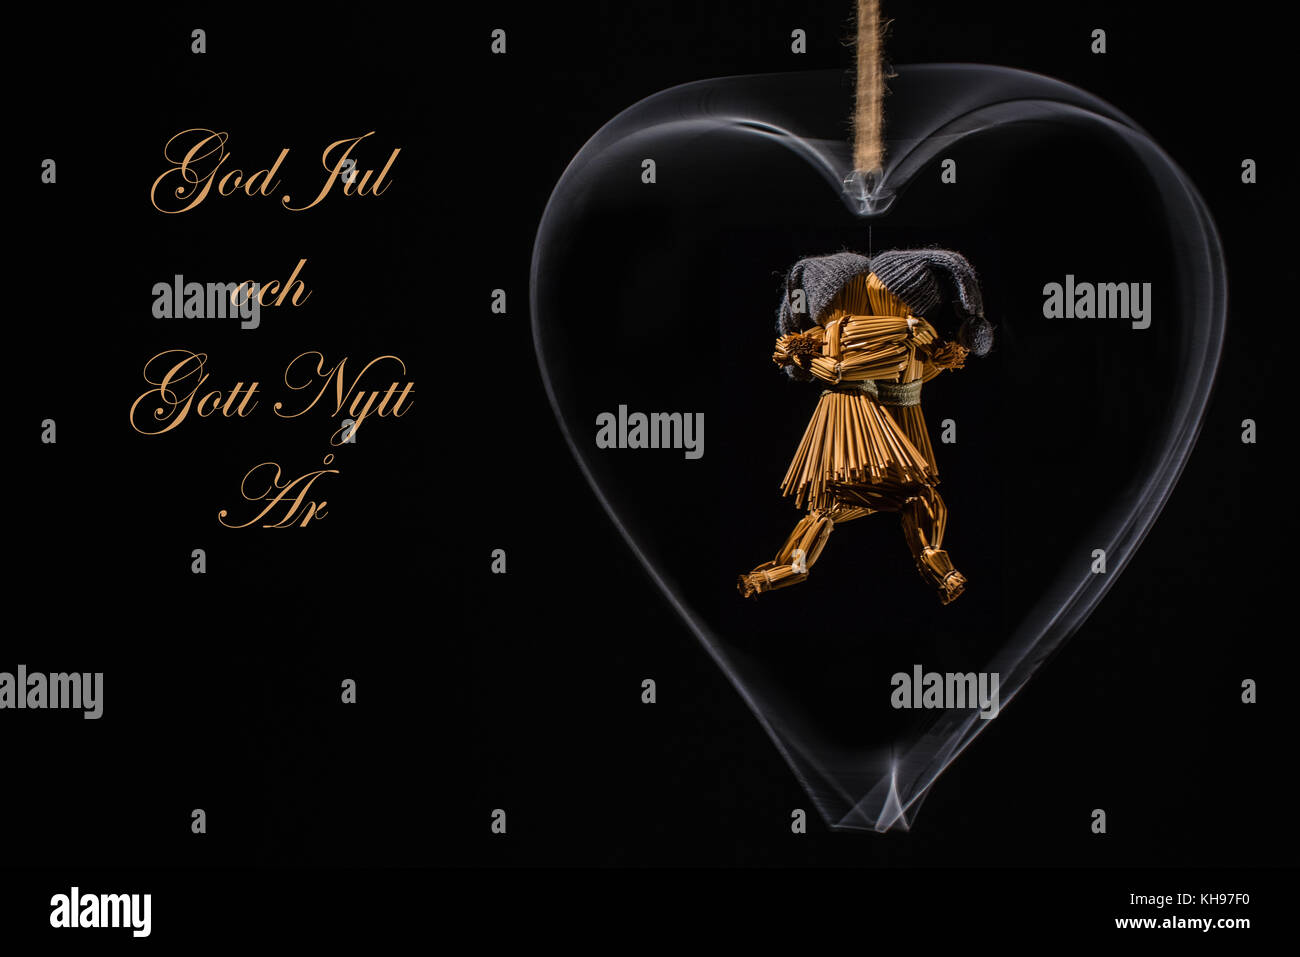 Christmas greetings in Swedish with dancing straw dolls in a rotating metal heart and with the text: God Jul och Gott Nytt År (=Merry Christmas and Ha Stock Photo